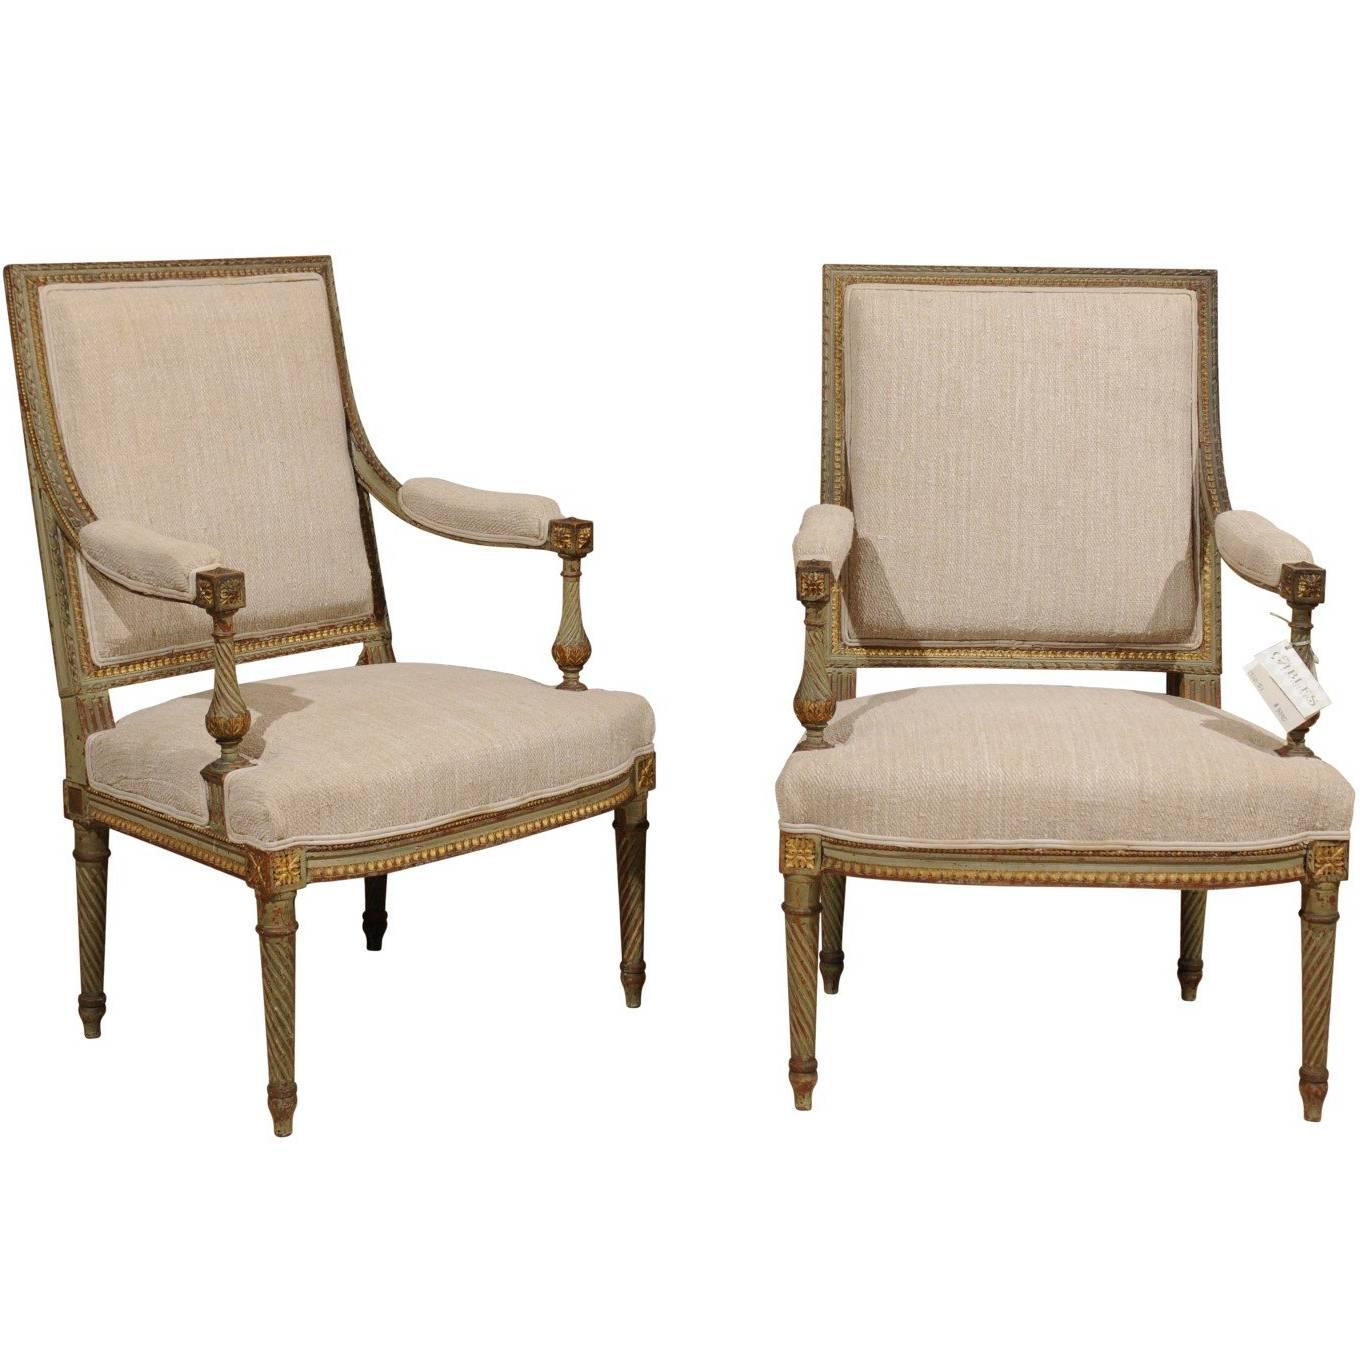 19th Century Pair of Louis XVI Style Painted Chairs, circa 1880 For Sale